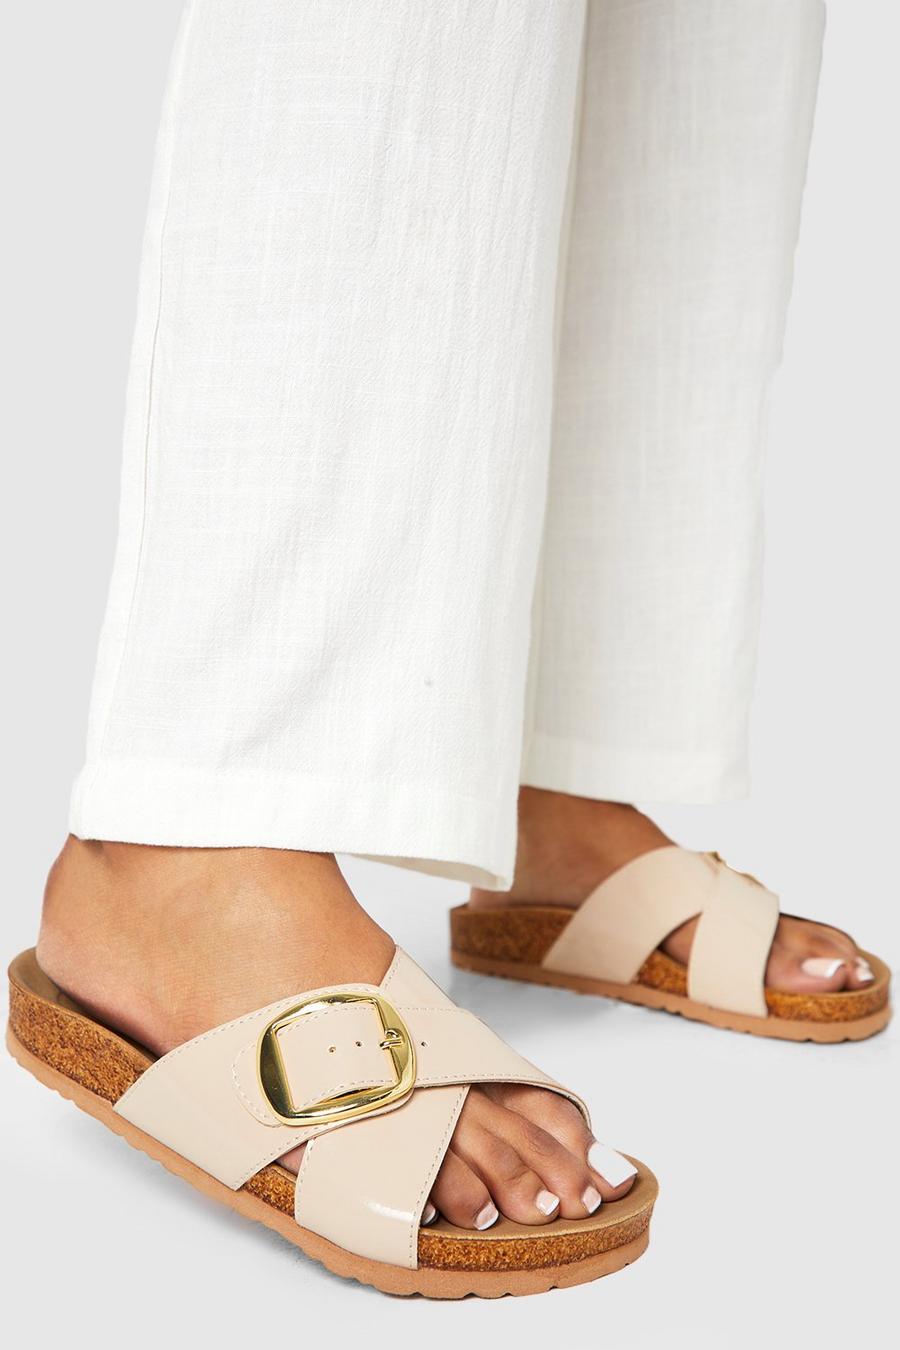 Wide Fit Sandals, Wide Fit Wedges